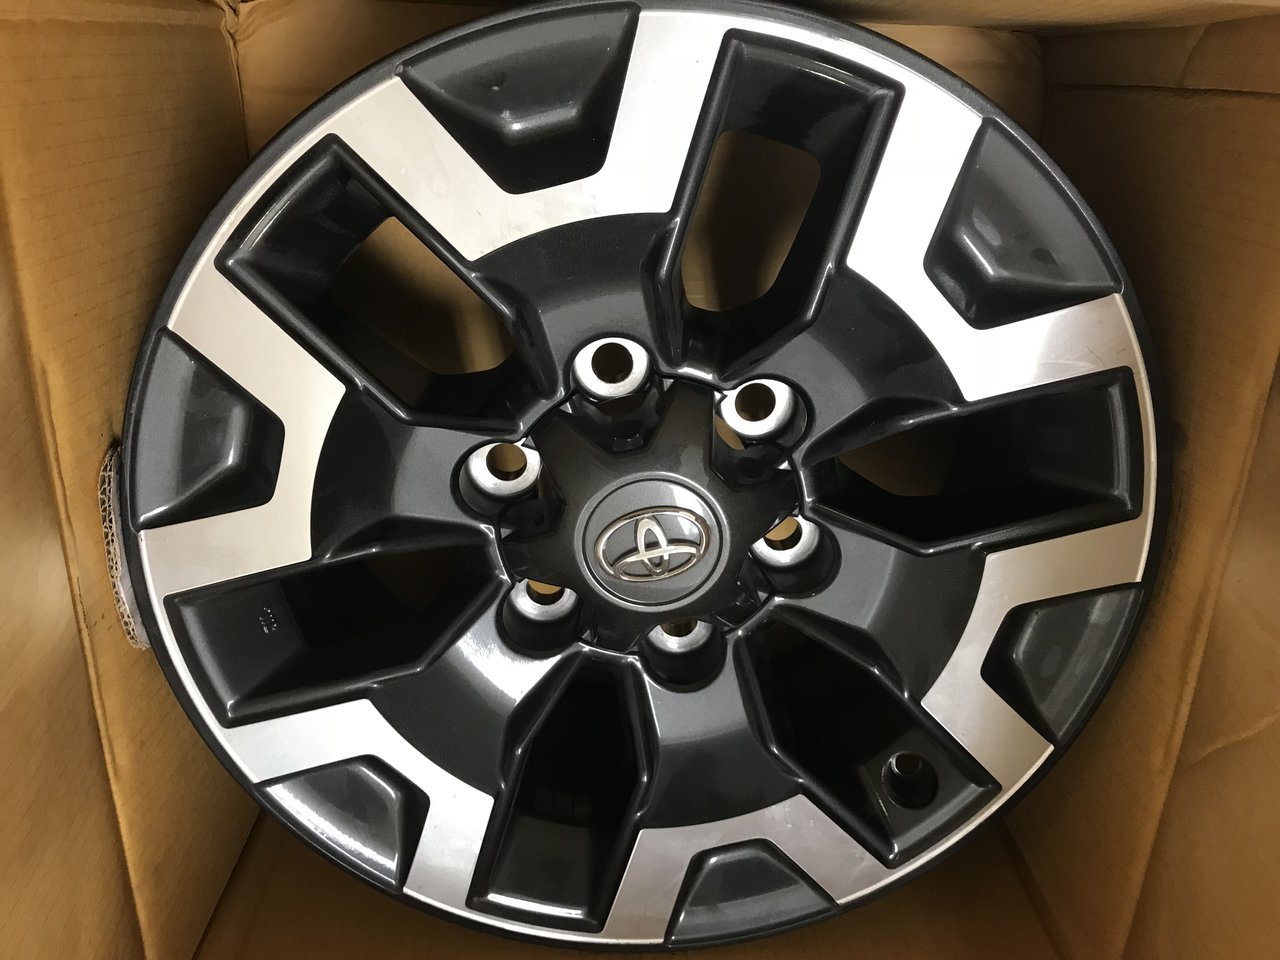 FS: 2016 TRD OR Wheels and Lug Nuts SOLD!!!! | Tacoma World